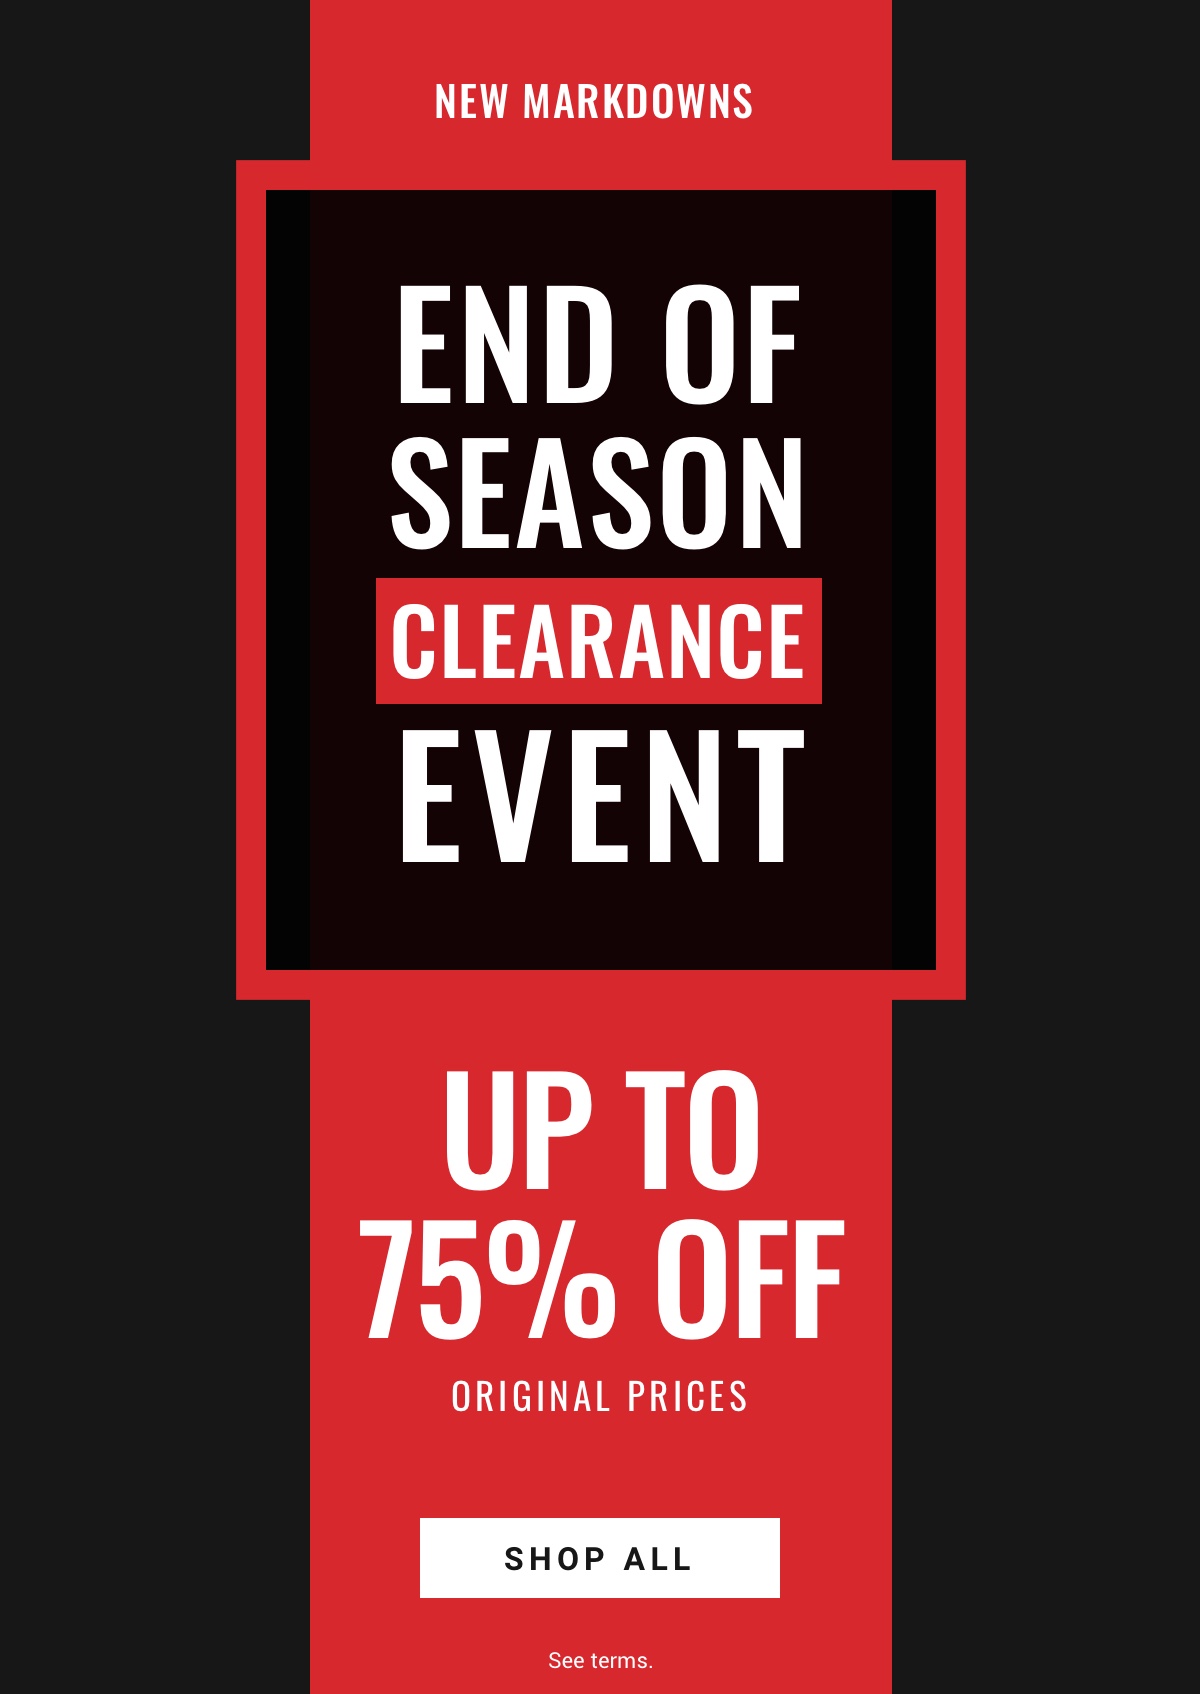 New Markdowns End of Season Clearance Event Up to 75% Off Original Prices - Shop All